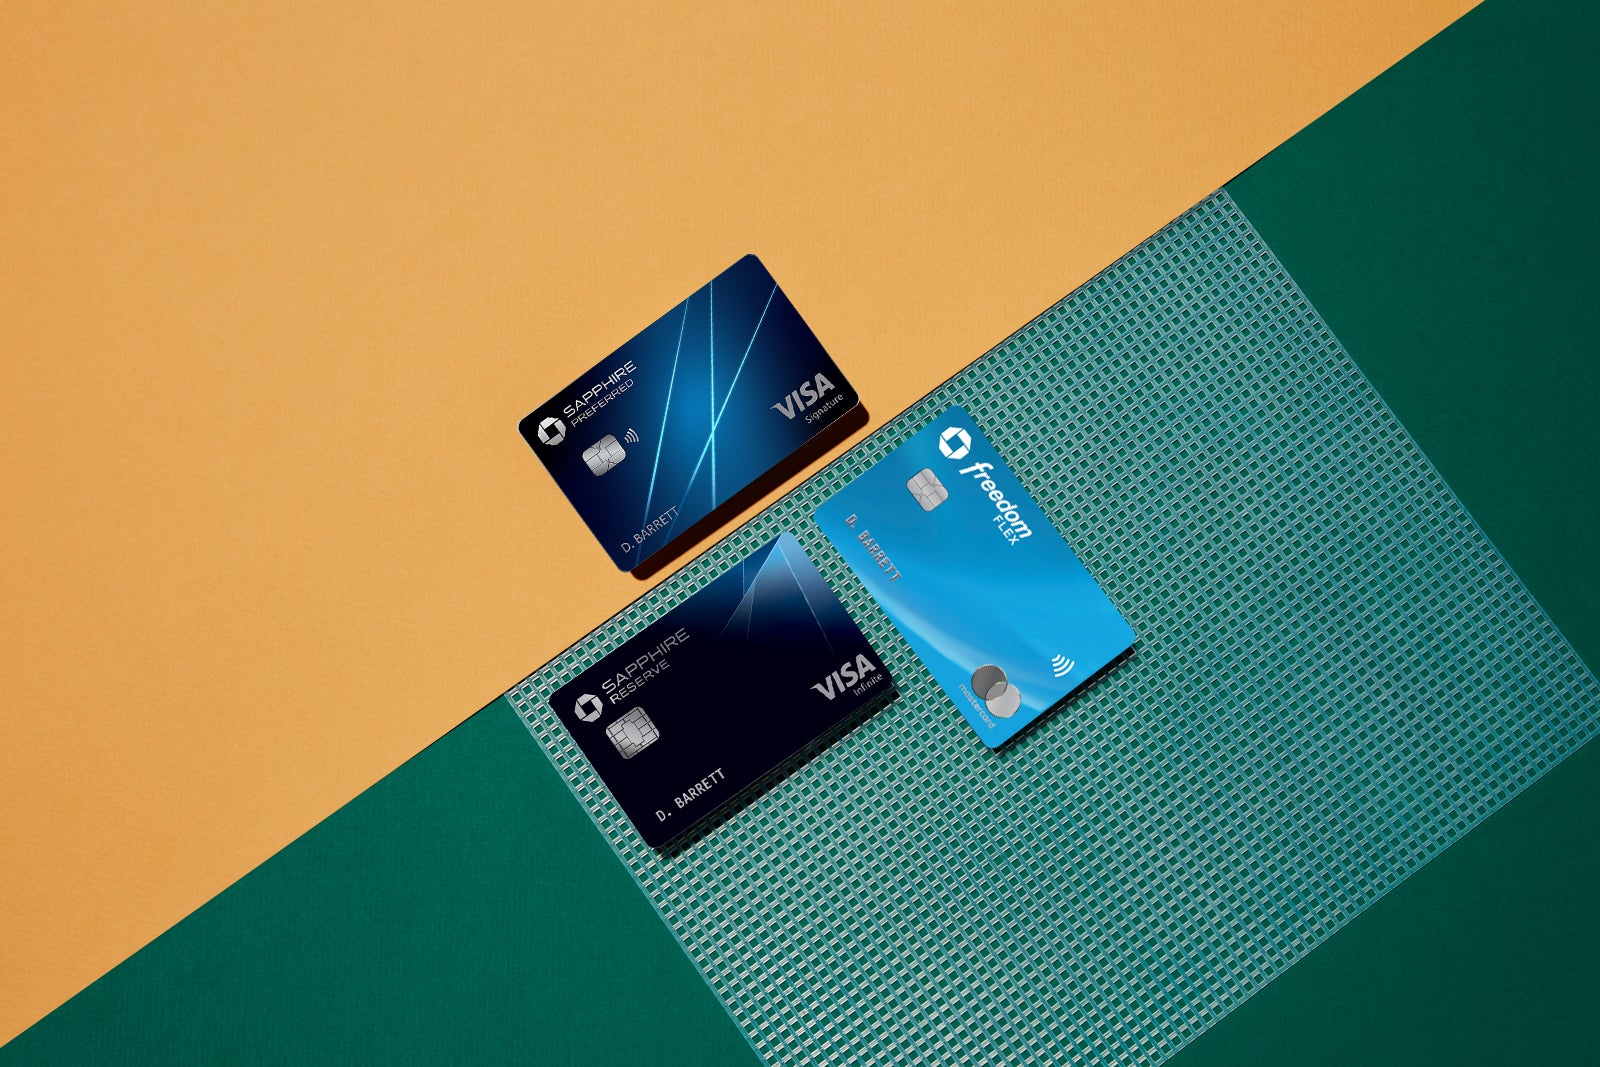 Photo shows several Chase credit cards on a multi-colored background